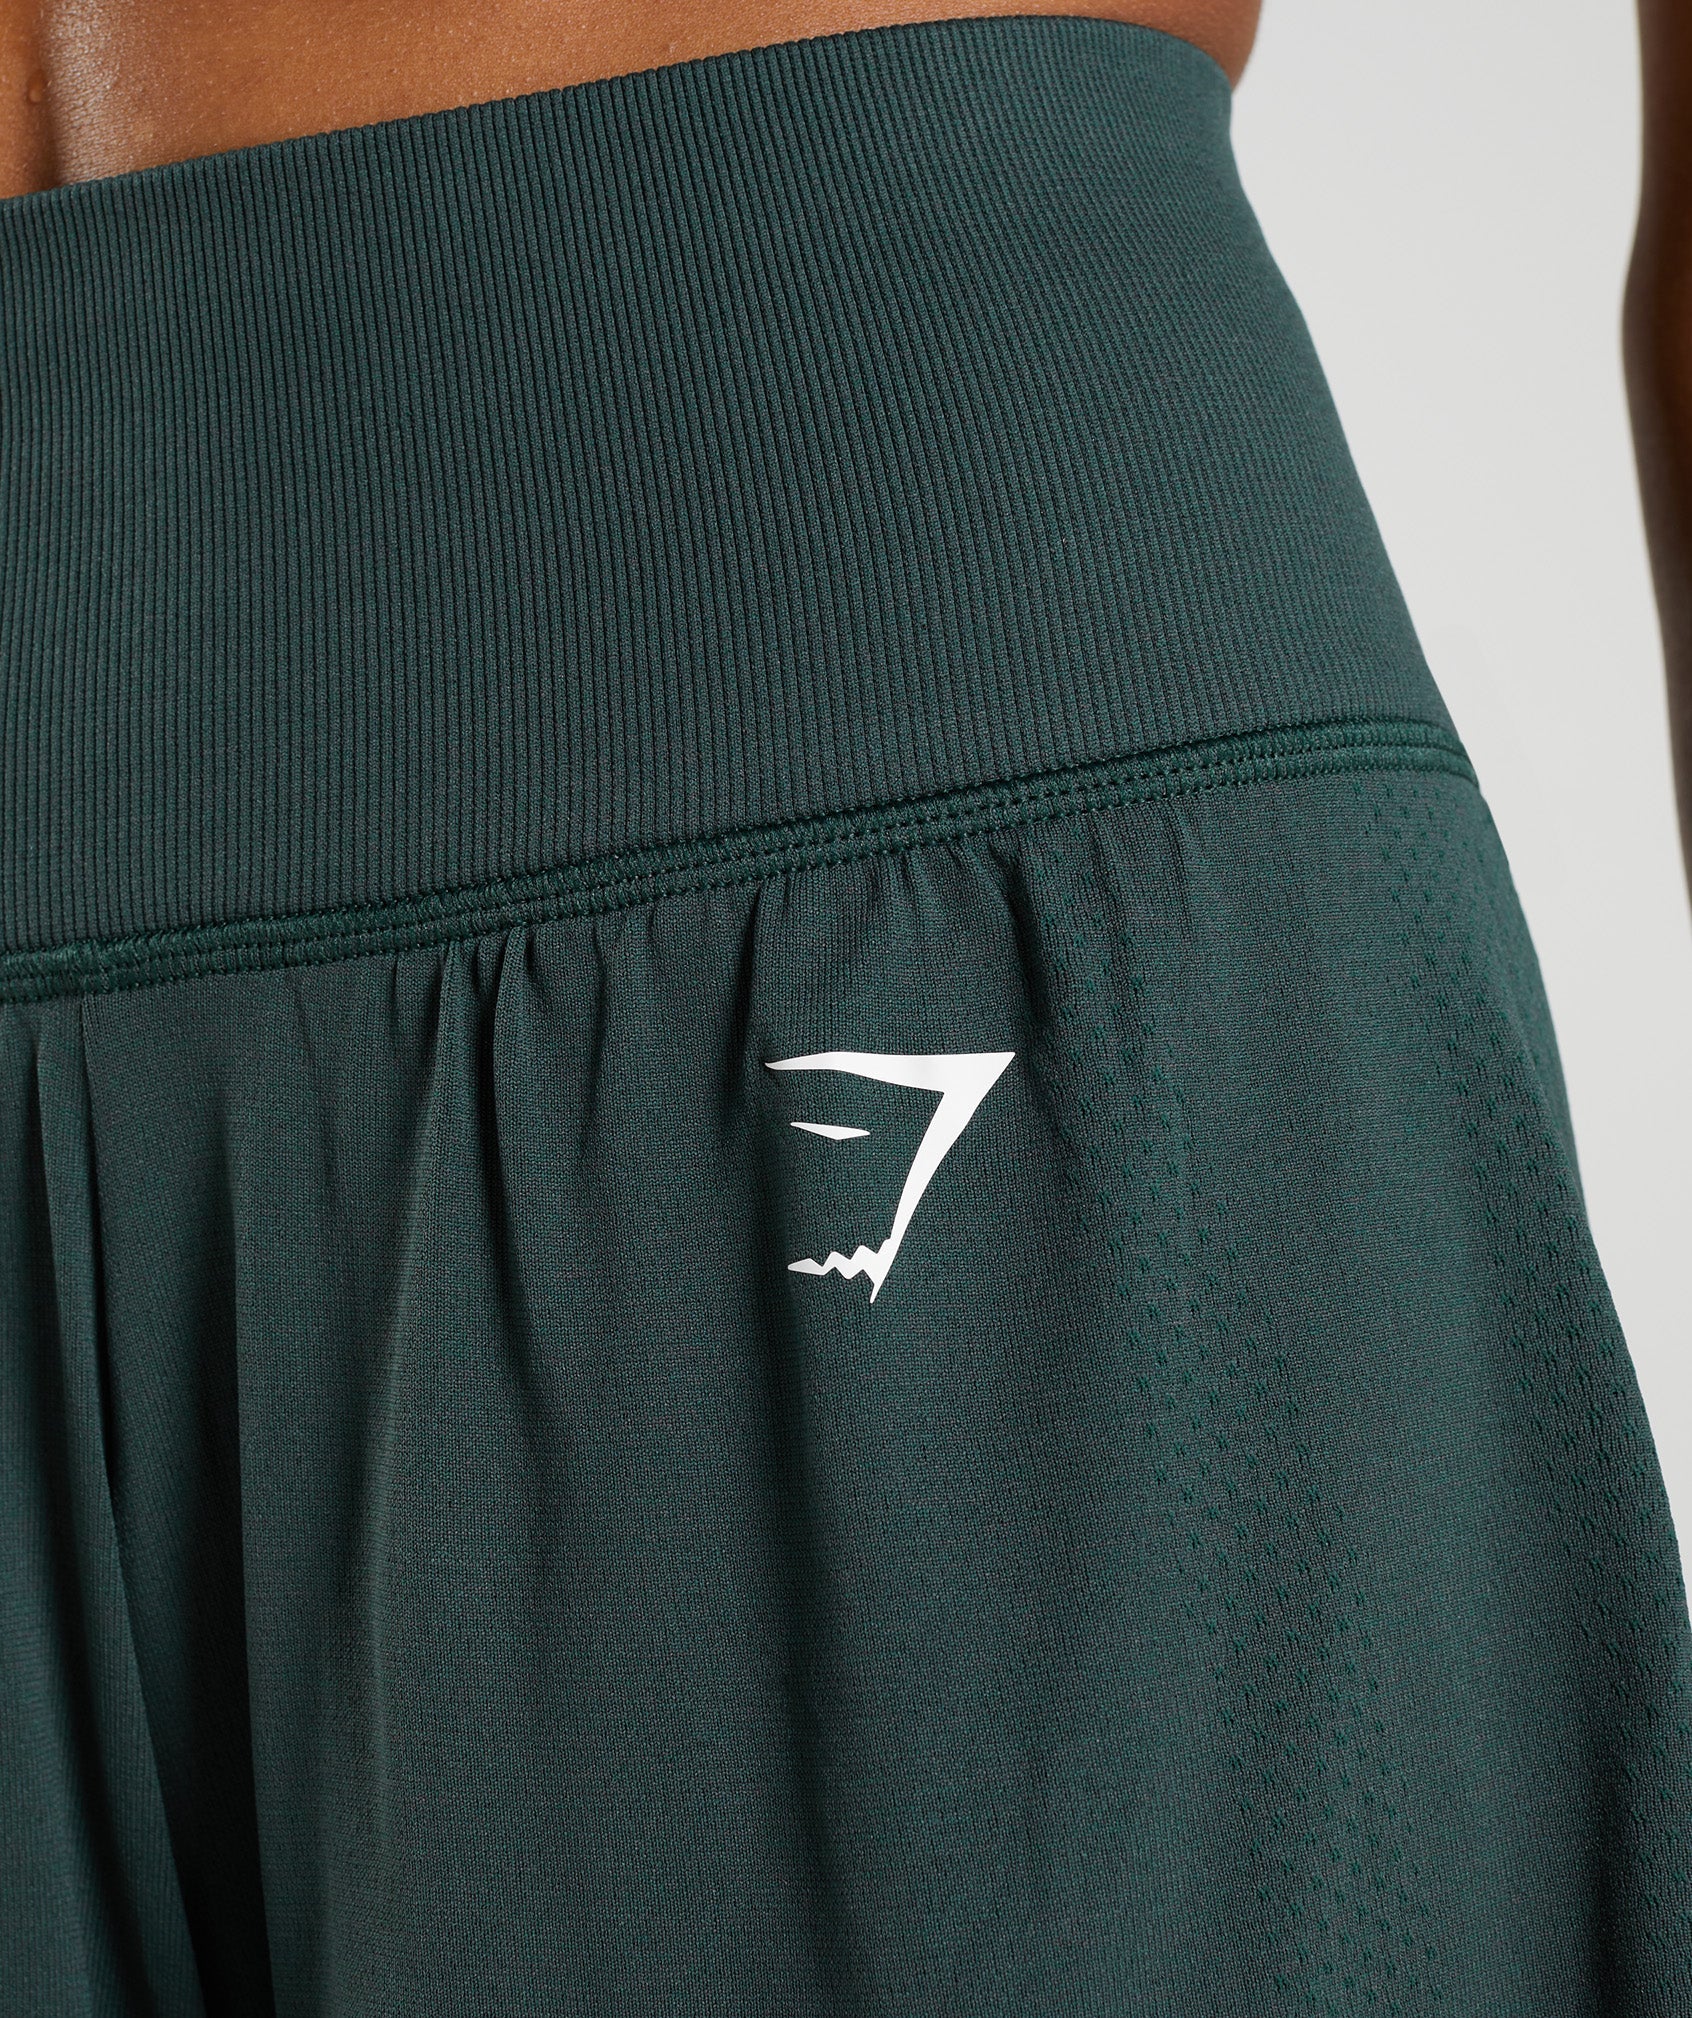 Vital Seamless 2.0 2-in-1 Shorts in Woodland Green/ Marl - view 5